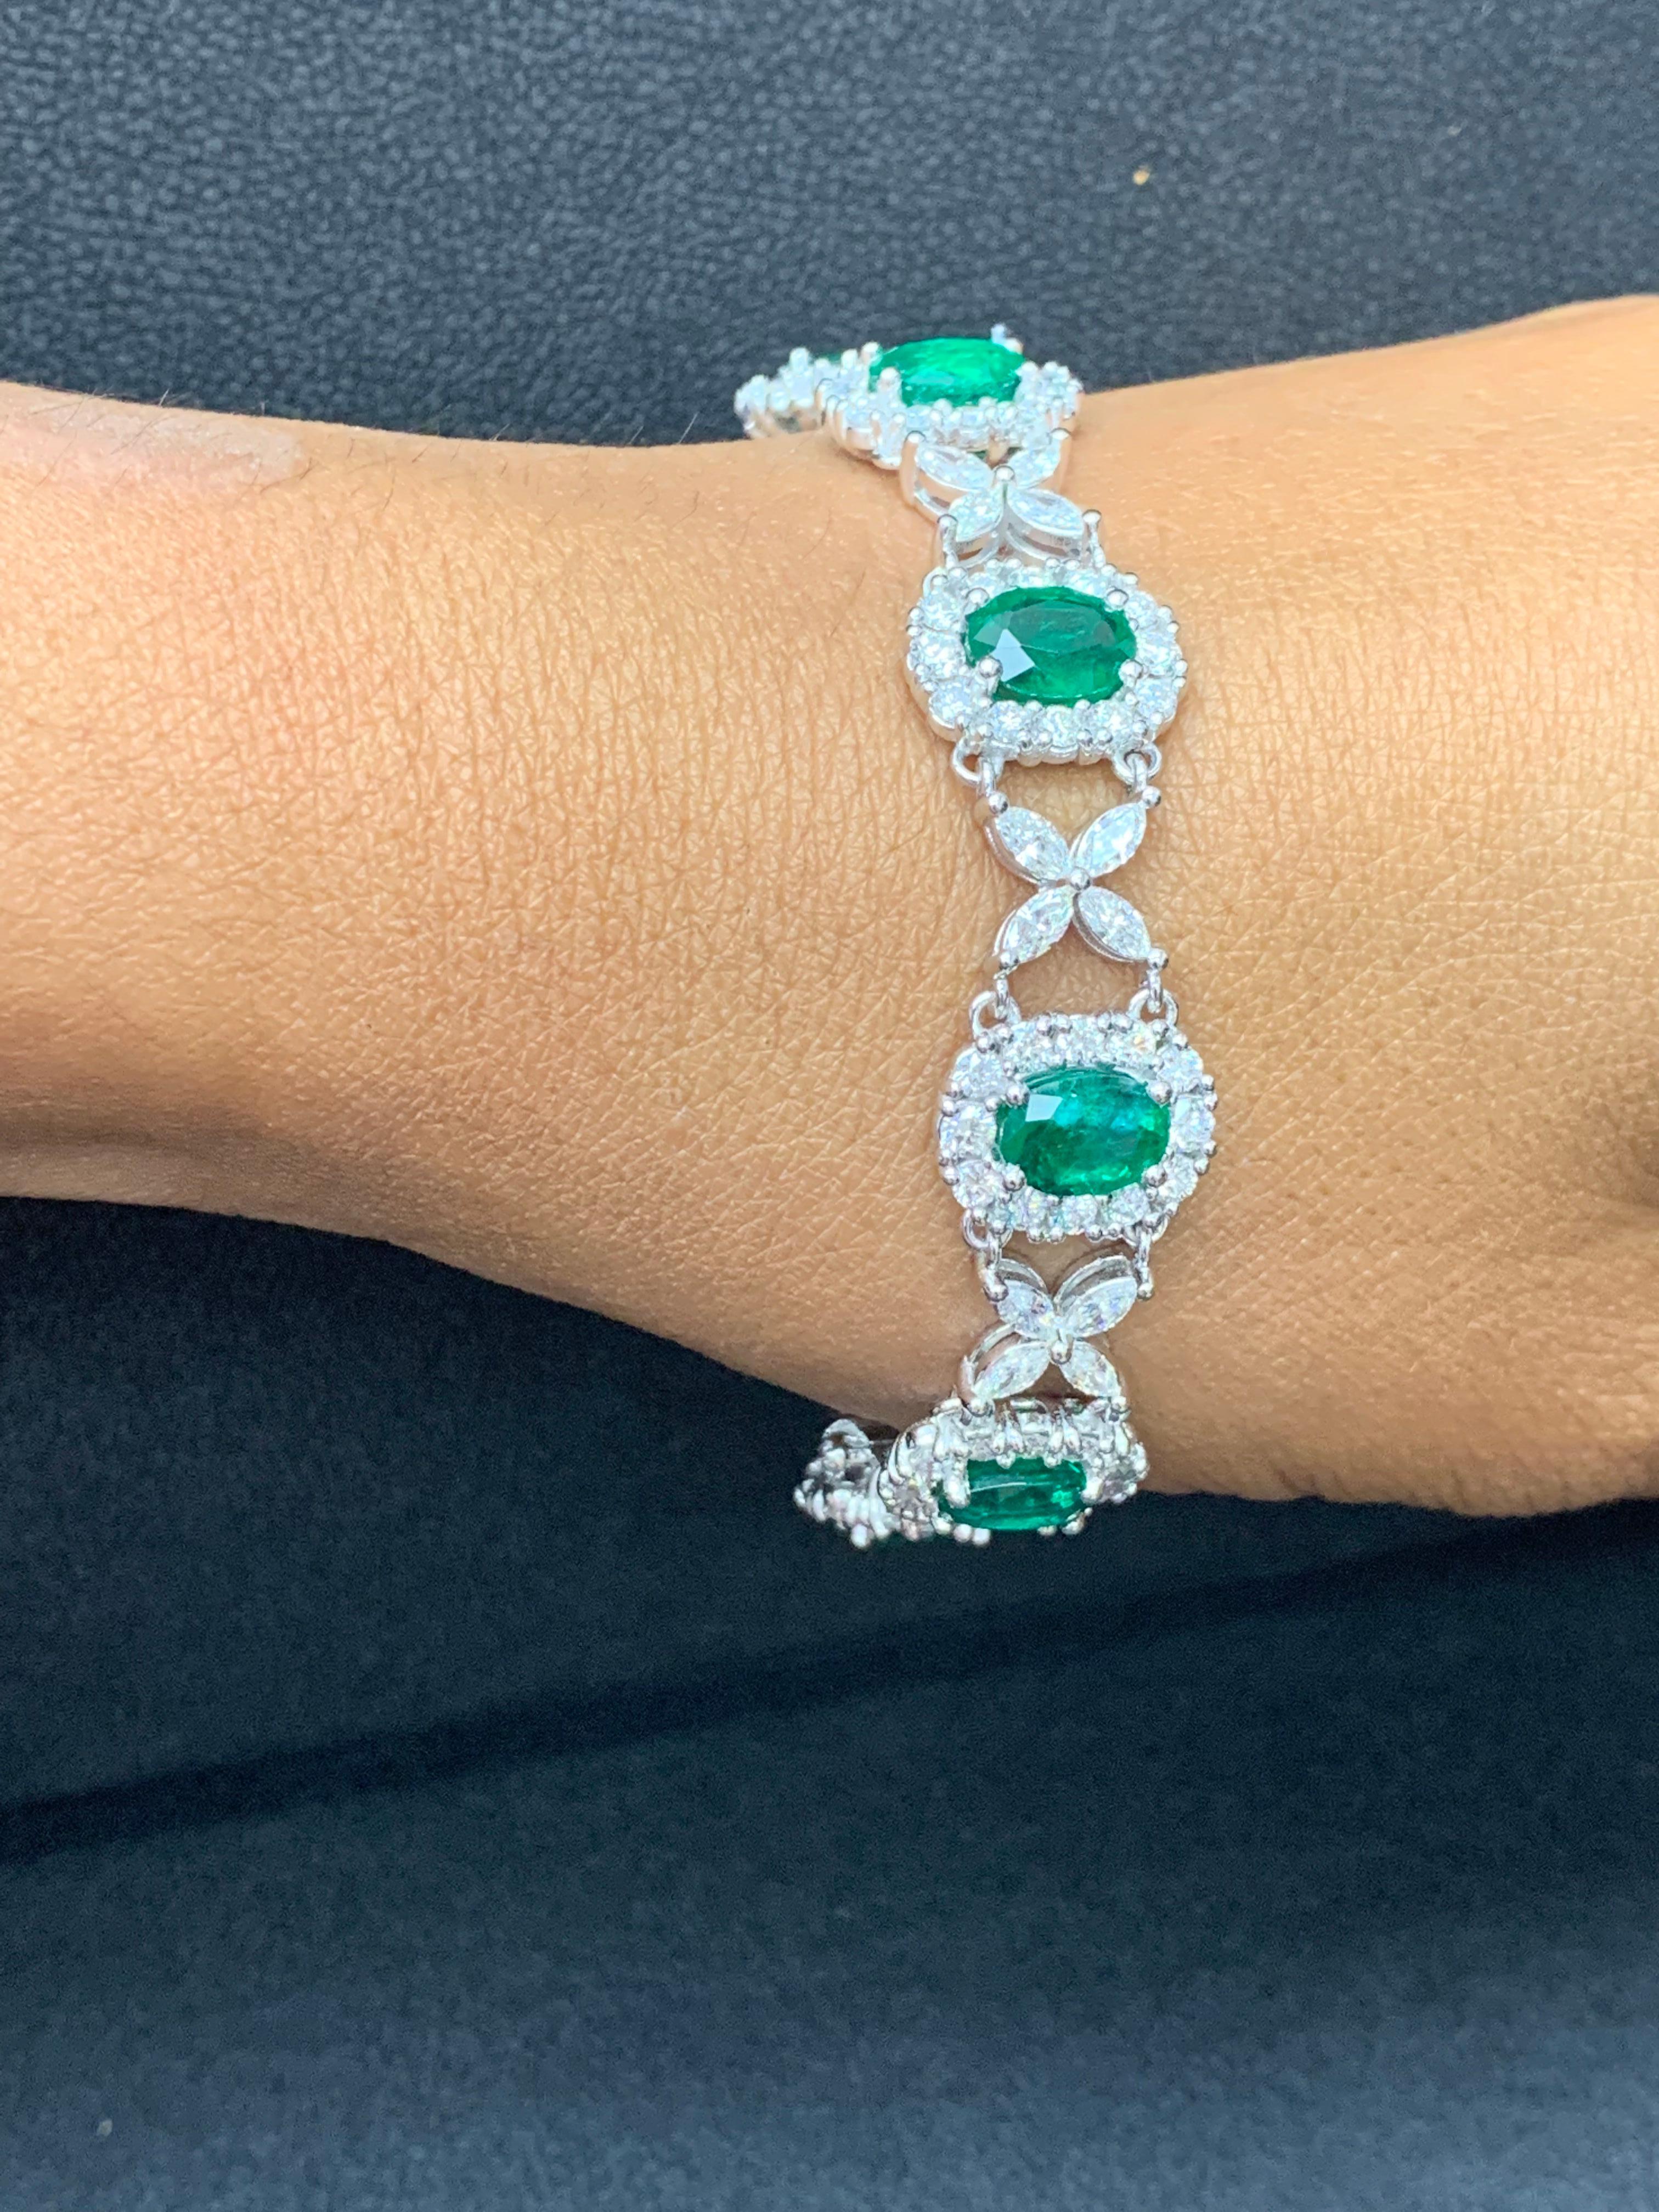 10.52 Carat Oval Cut Emerald and Diamond Tennis Bracelet in 14K White Gold For Sale 10